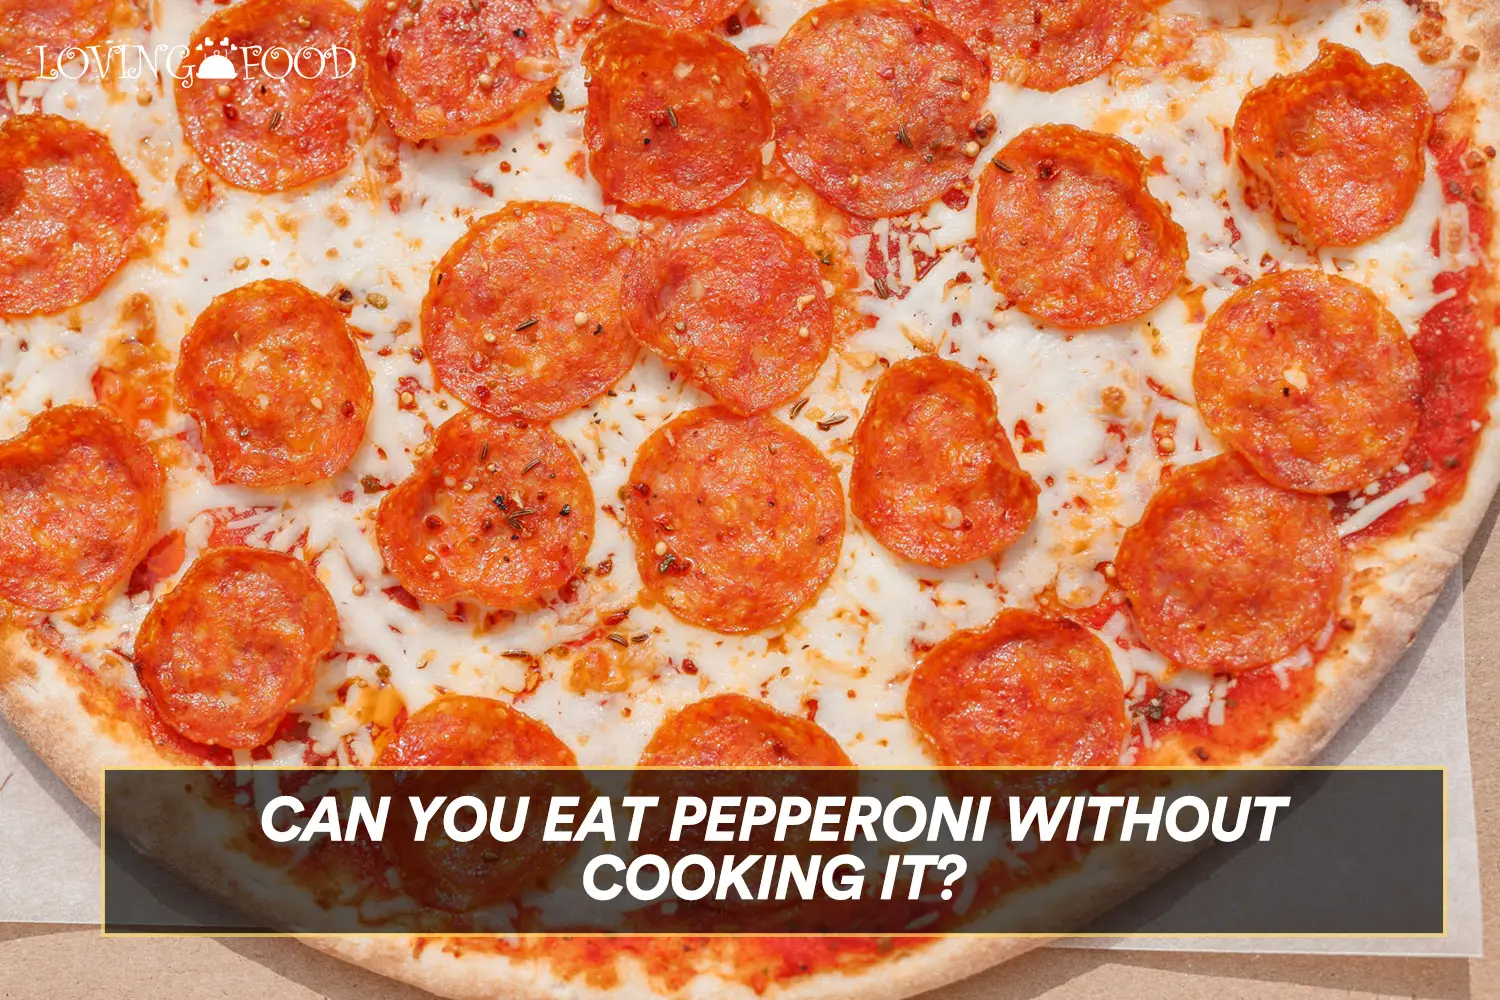 Can You Eat Pepperoni Without Cooking It? - Loving Food